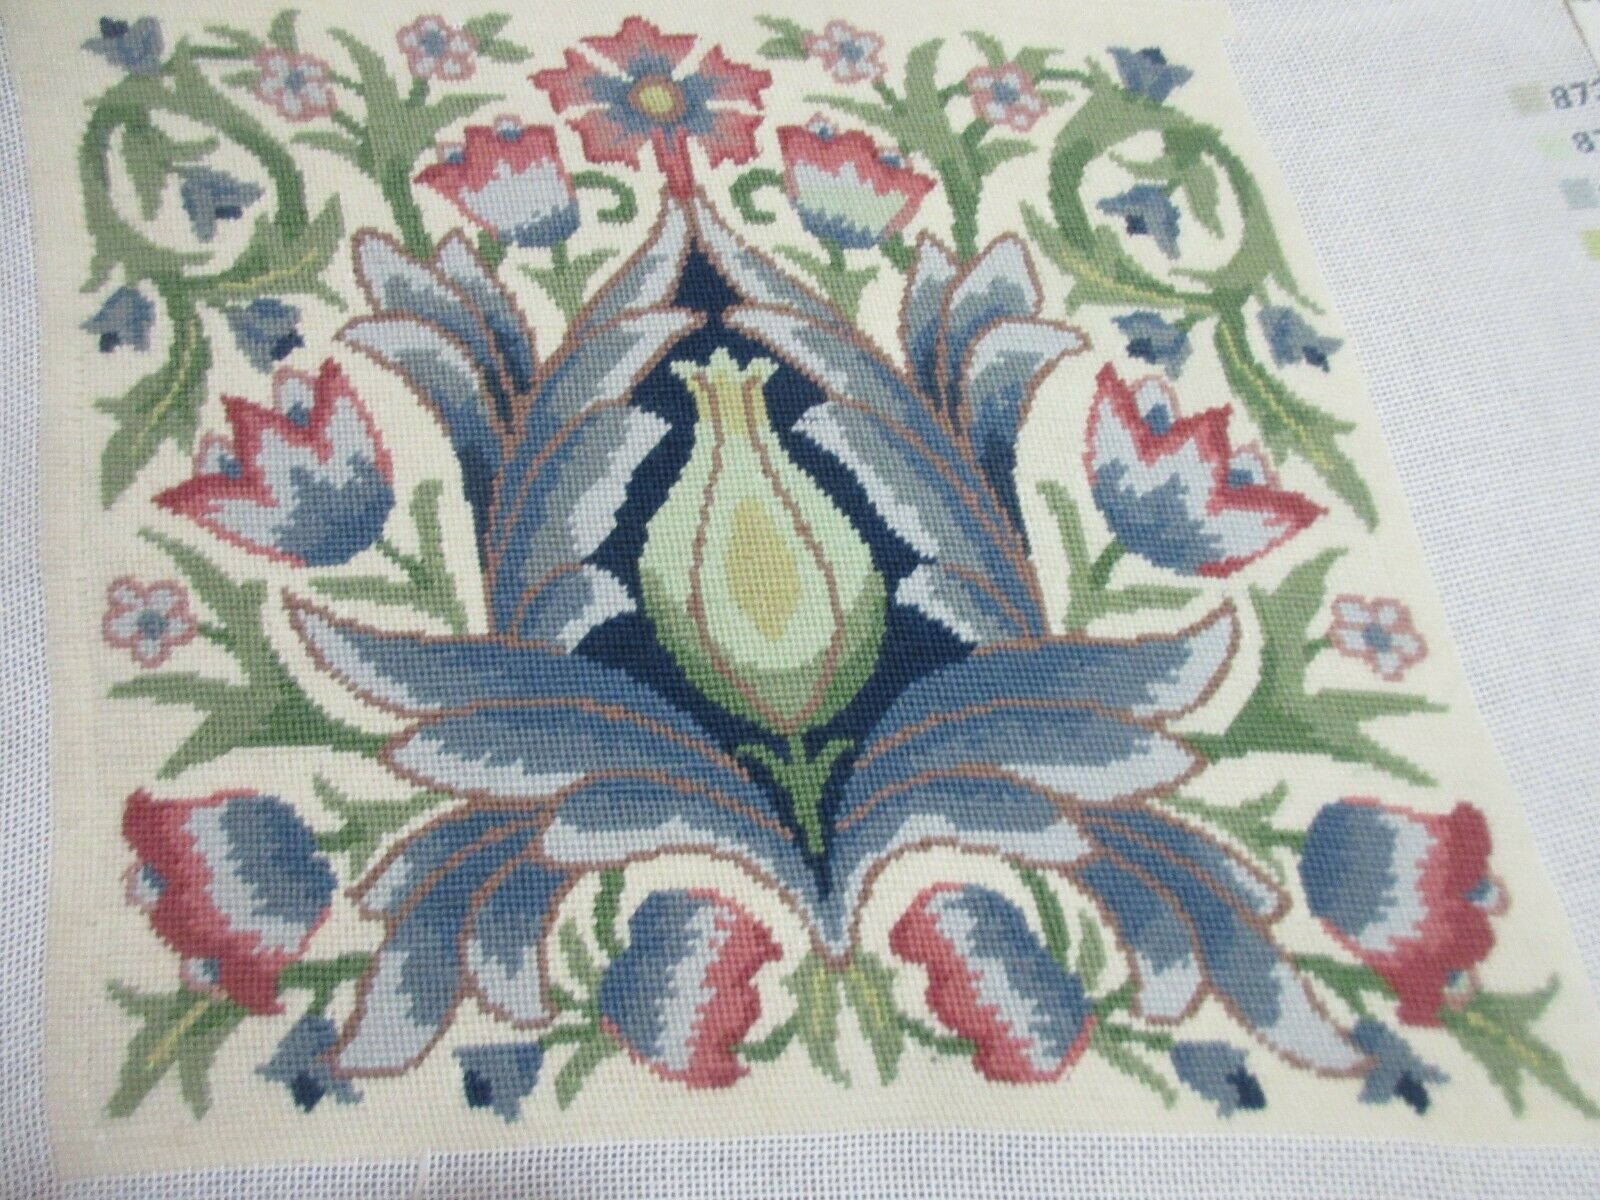 BETH RUSSELL Needlepoint Stitching Completed ARTICHOKE I